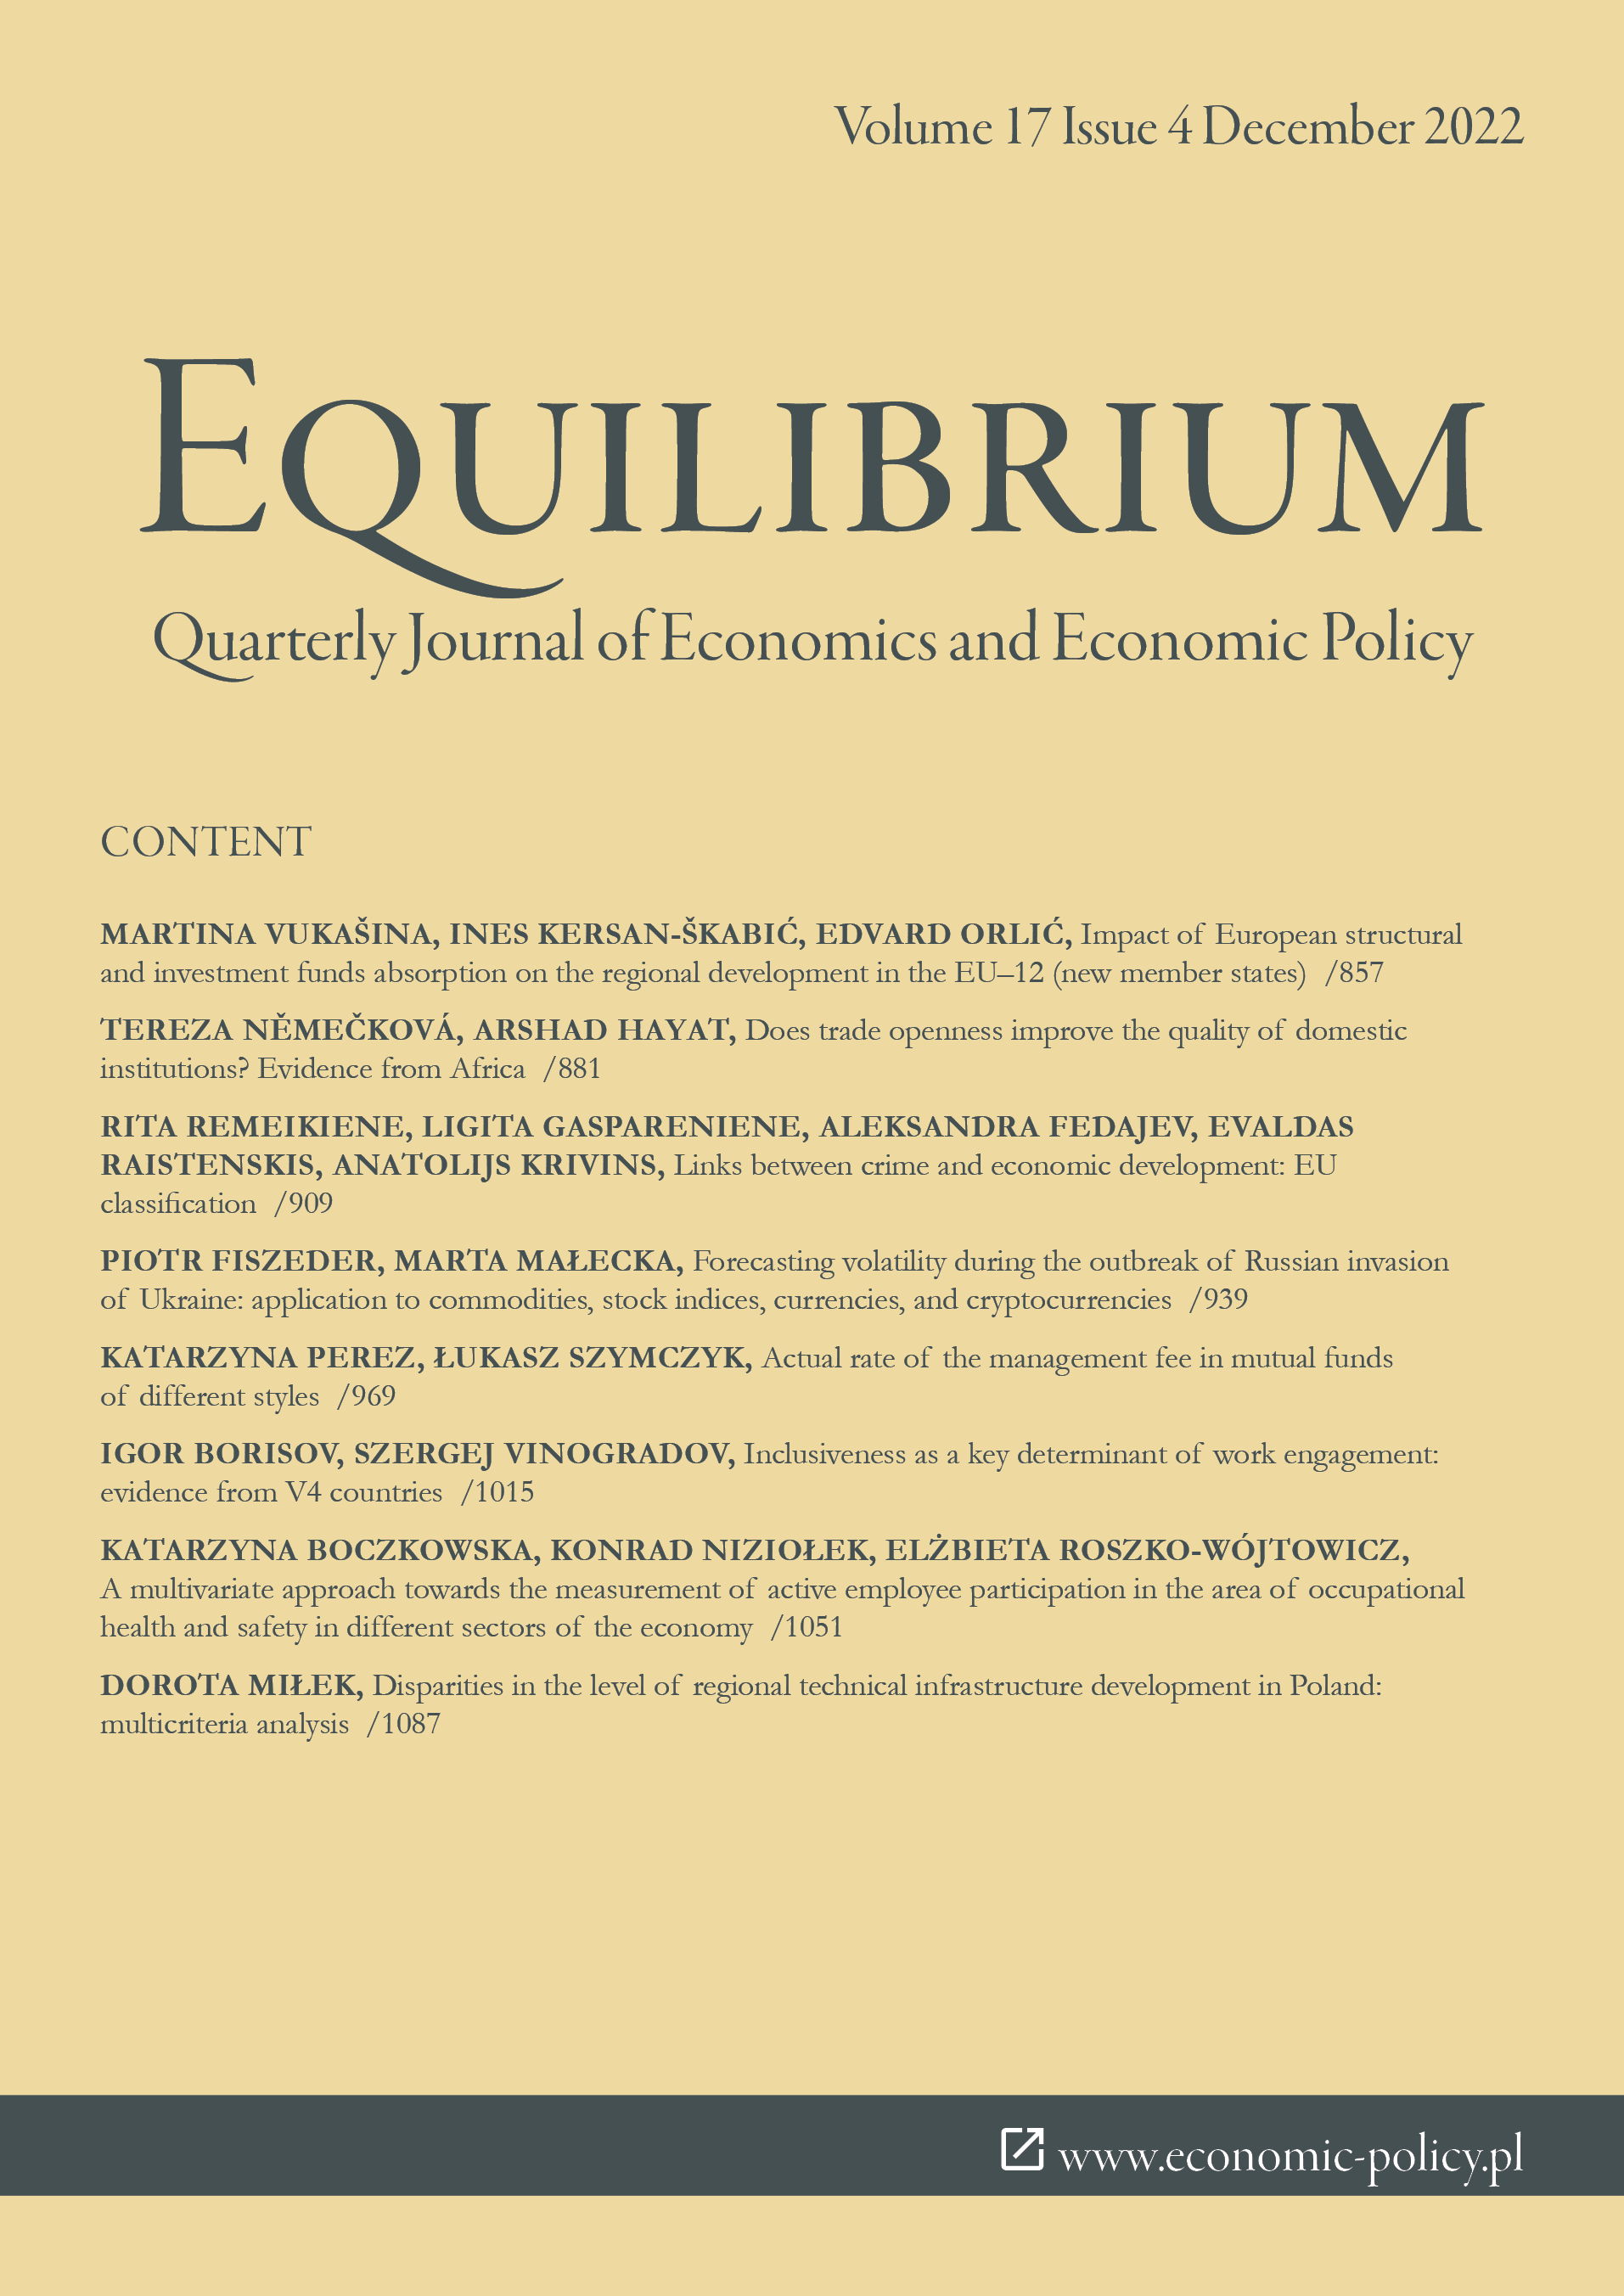 A multivariate approach towards the measurement of active employee participation in the area of occupational health and safety in different sectors of the economy Cover Image